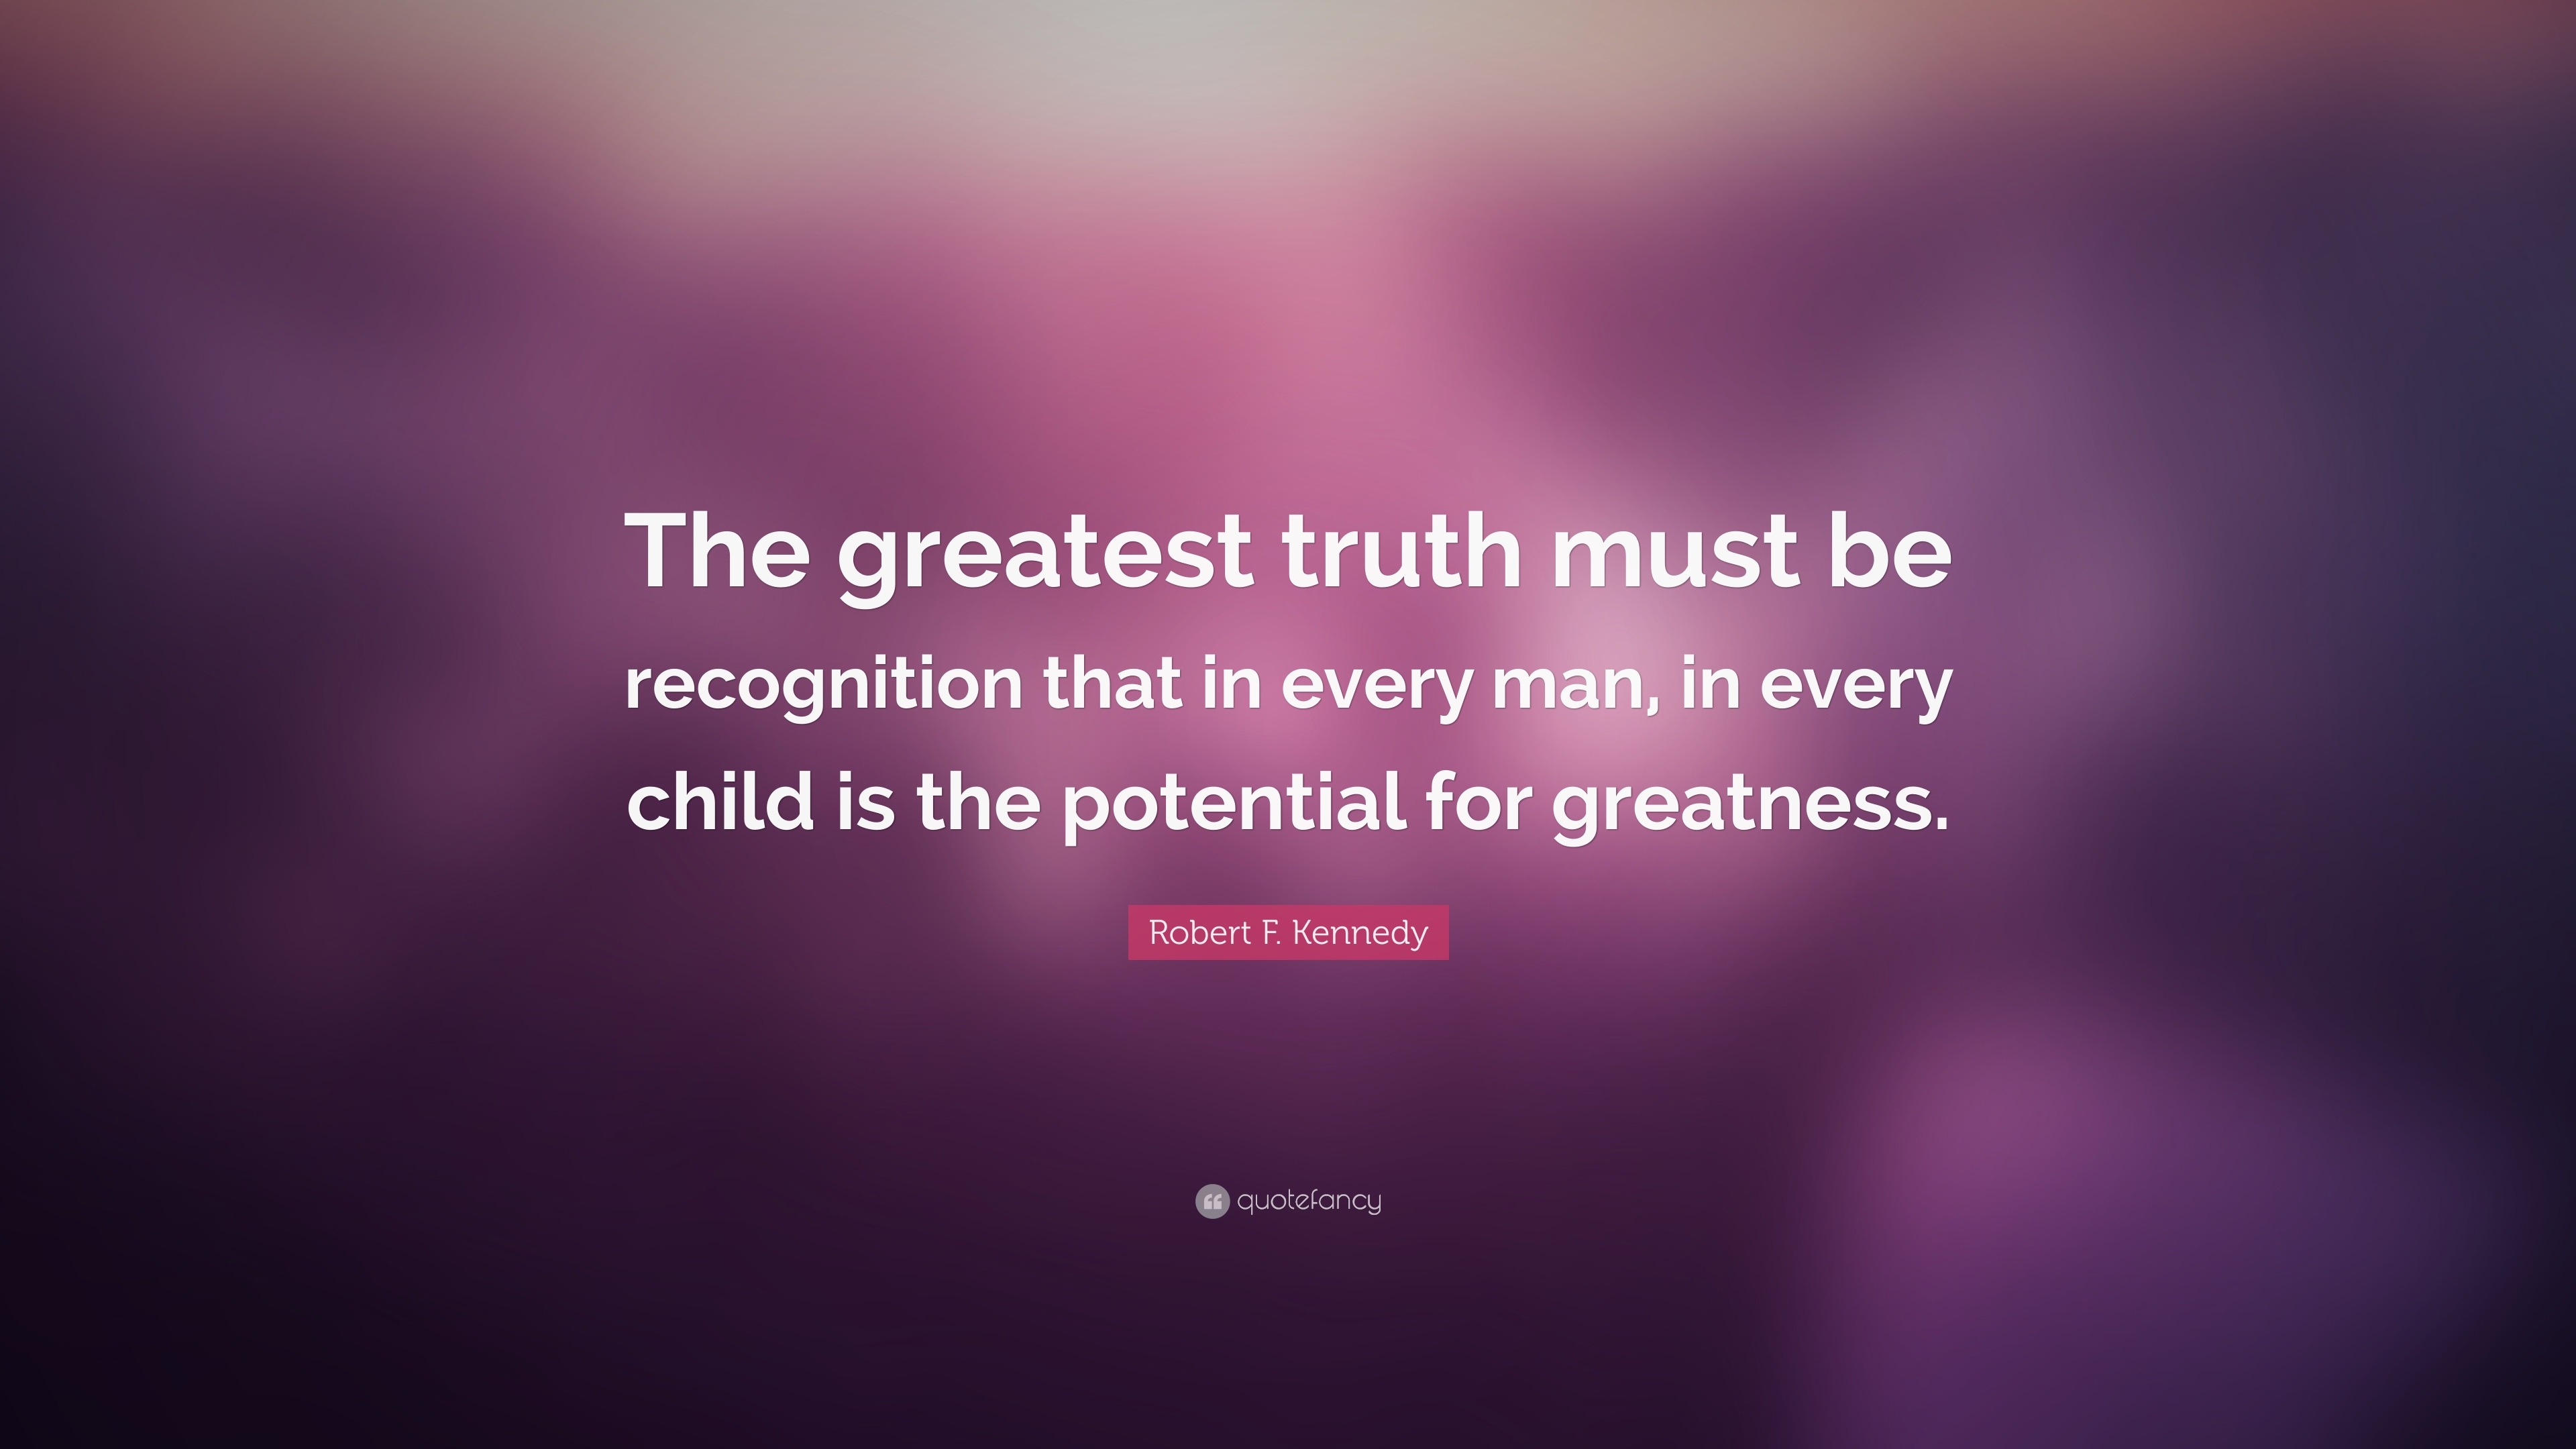 Greatness: What is the greatest thing about the greatest man in